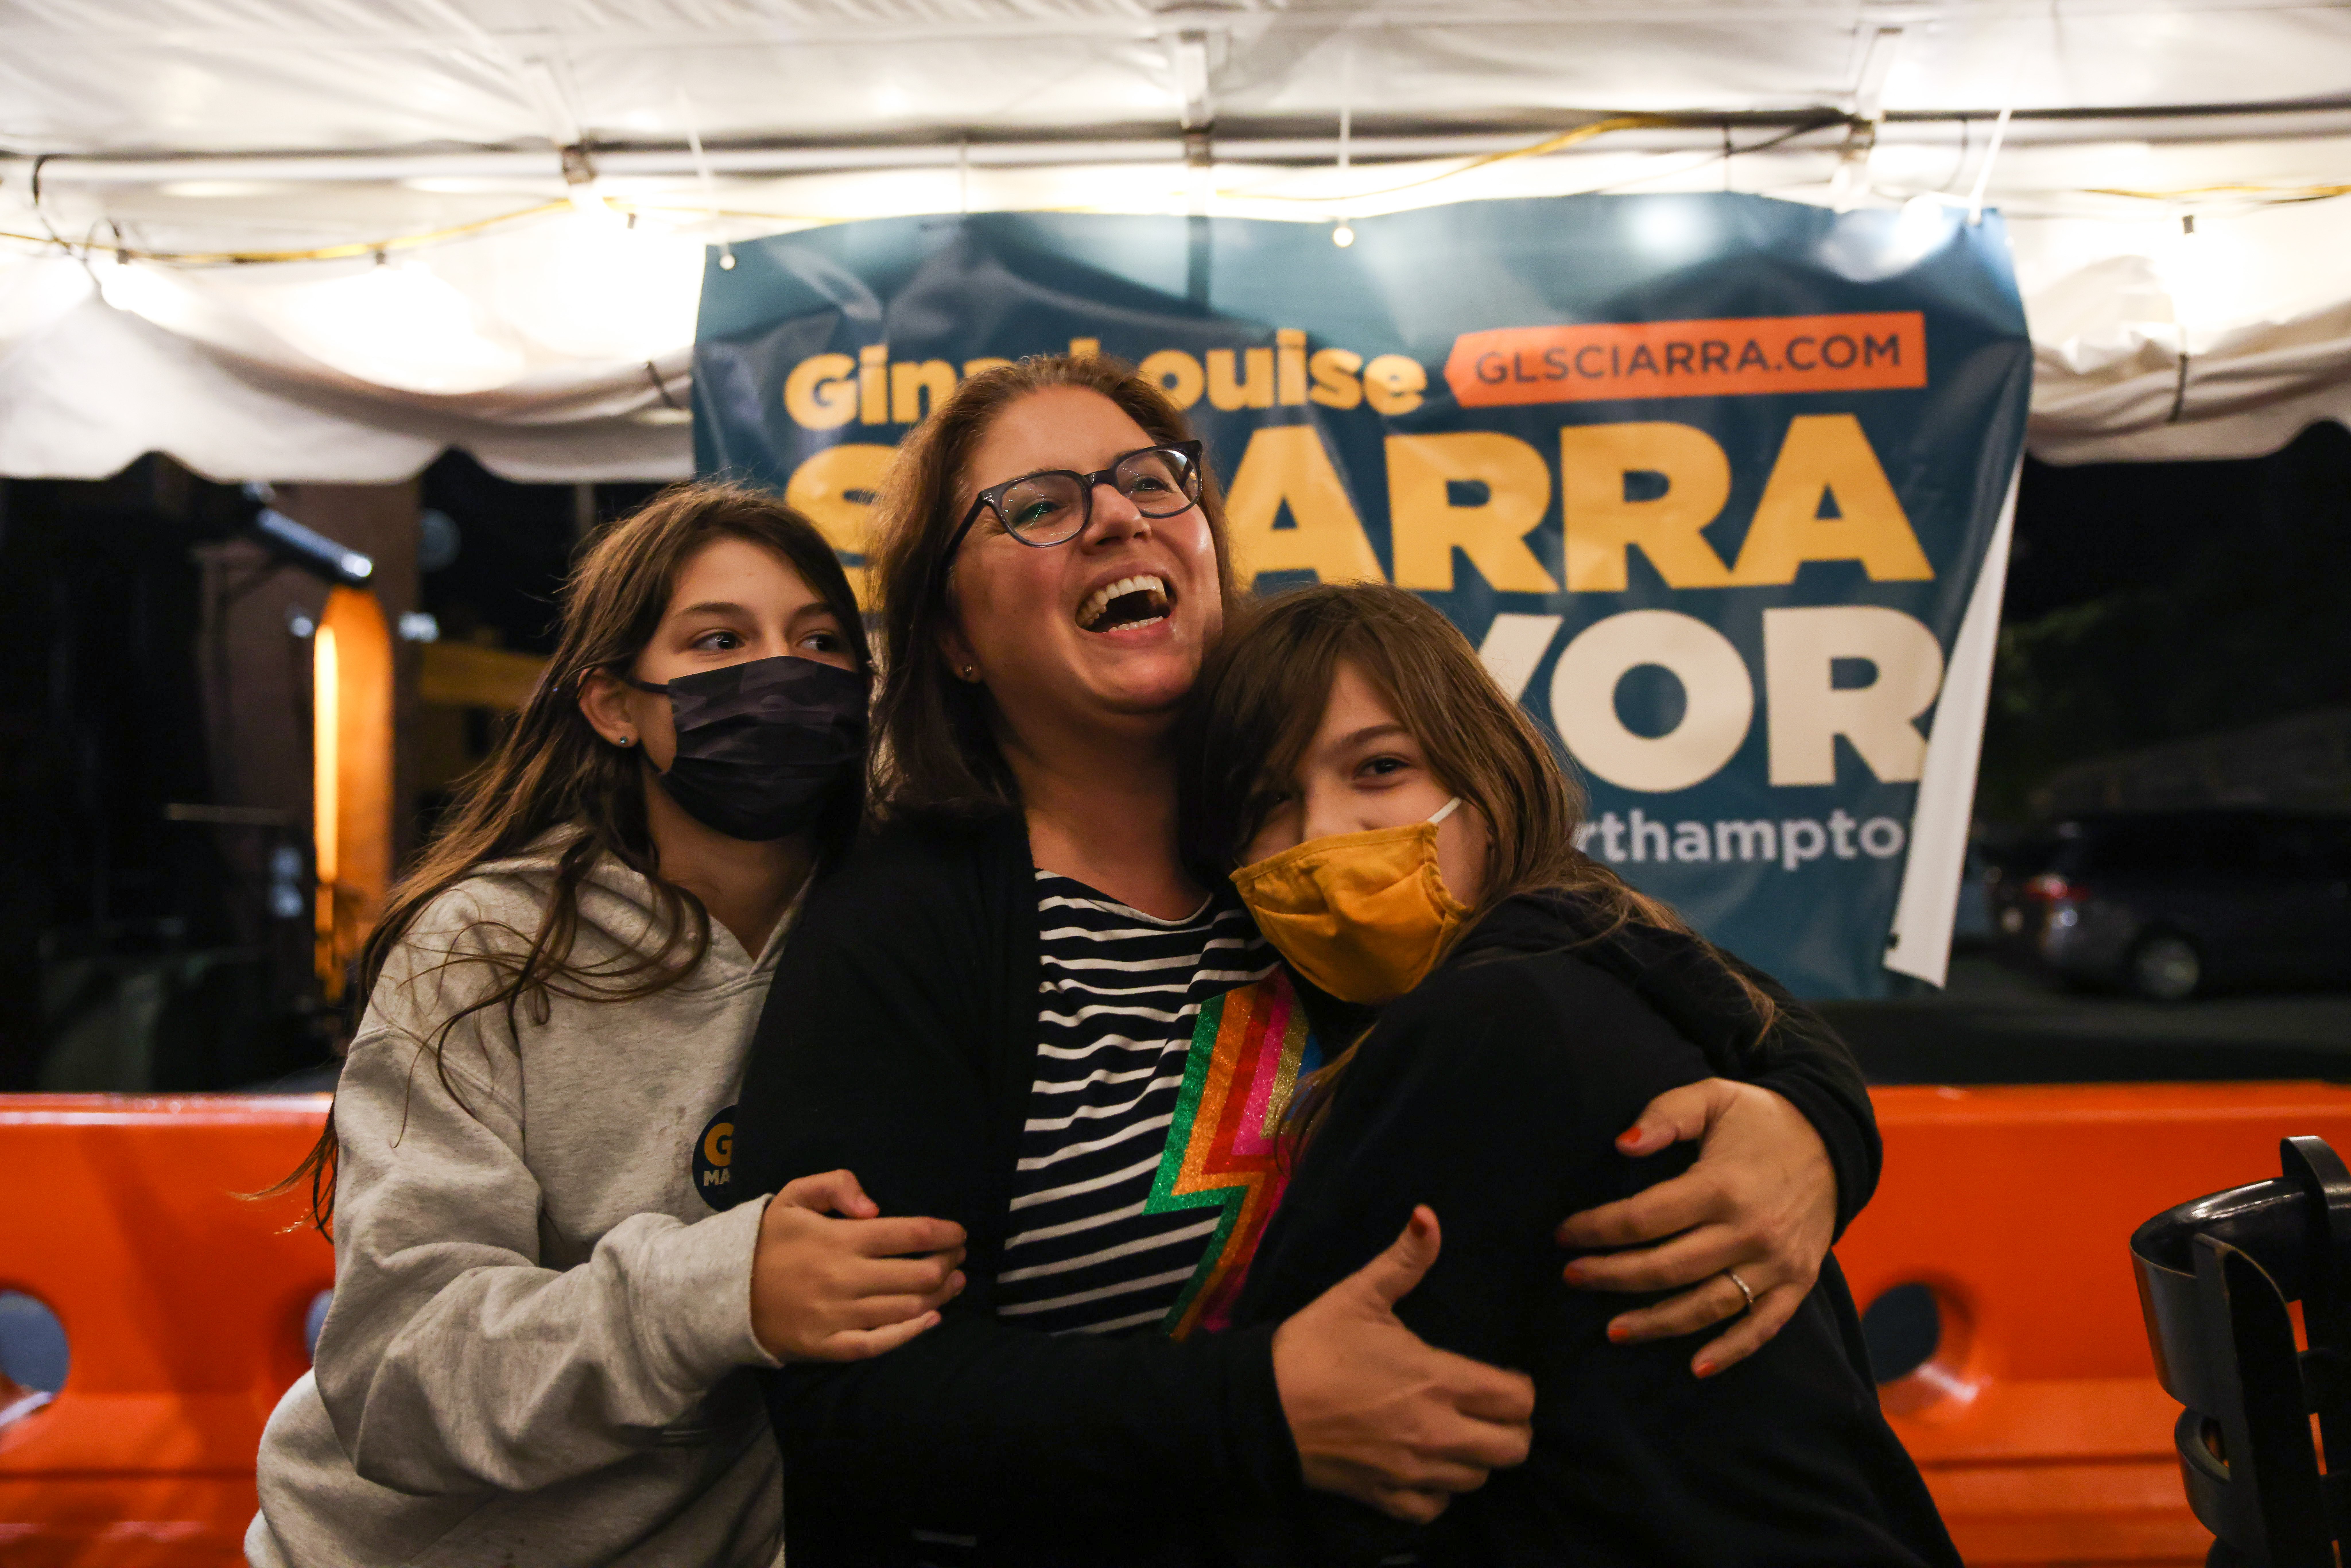 Mayoral candidate Gina-Louise Sciarra, center, celebrates her first-place finish in the Northampton preliminary election Sept. 28, 2021, at Fitzwilly's restaurant.
With her are daughters Alazne Scher, 12, Simone Scher, 9. (Hoang 'Leon' Nguyen / The Republican)